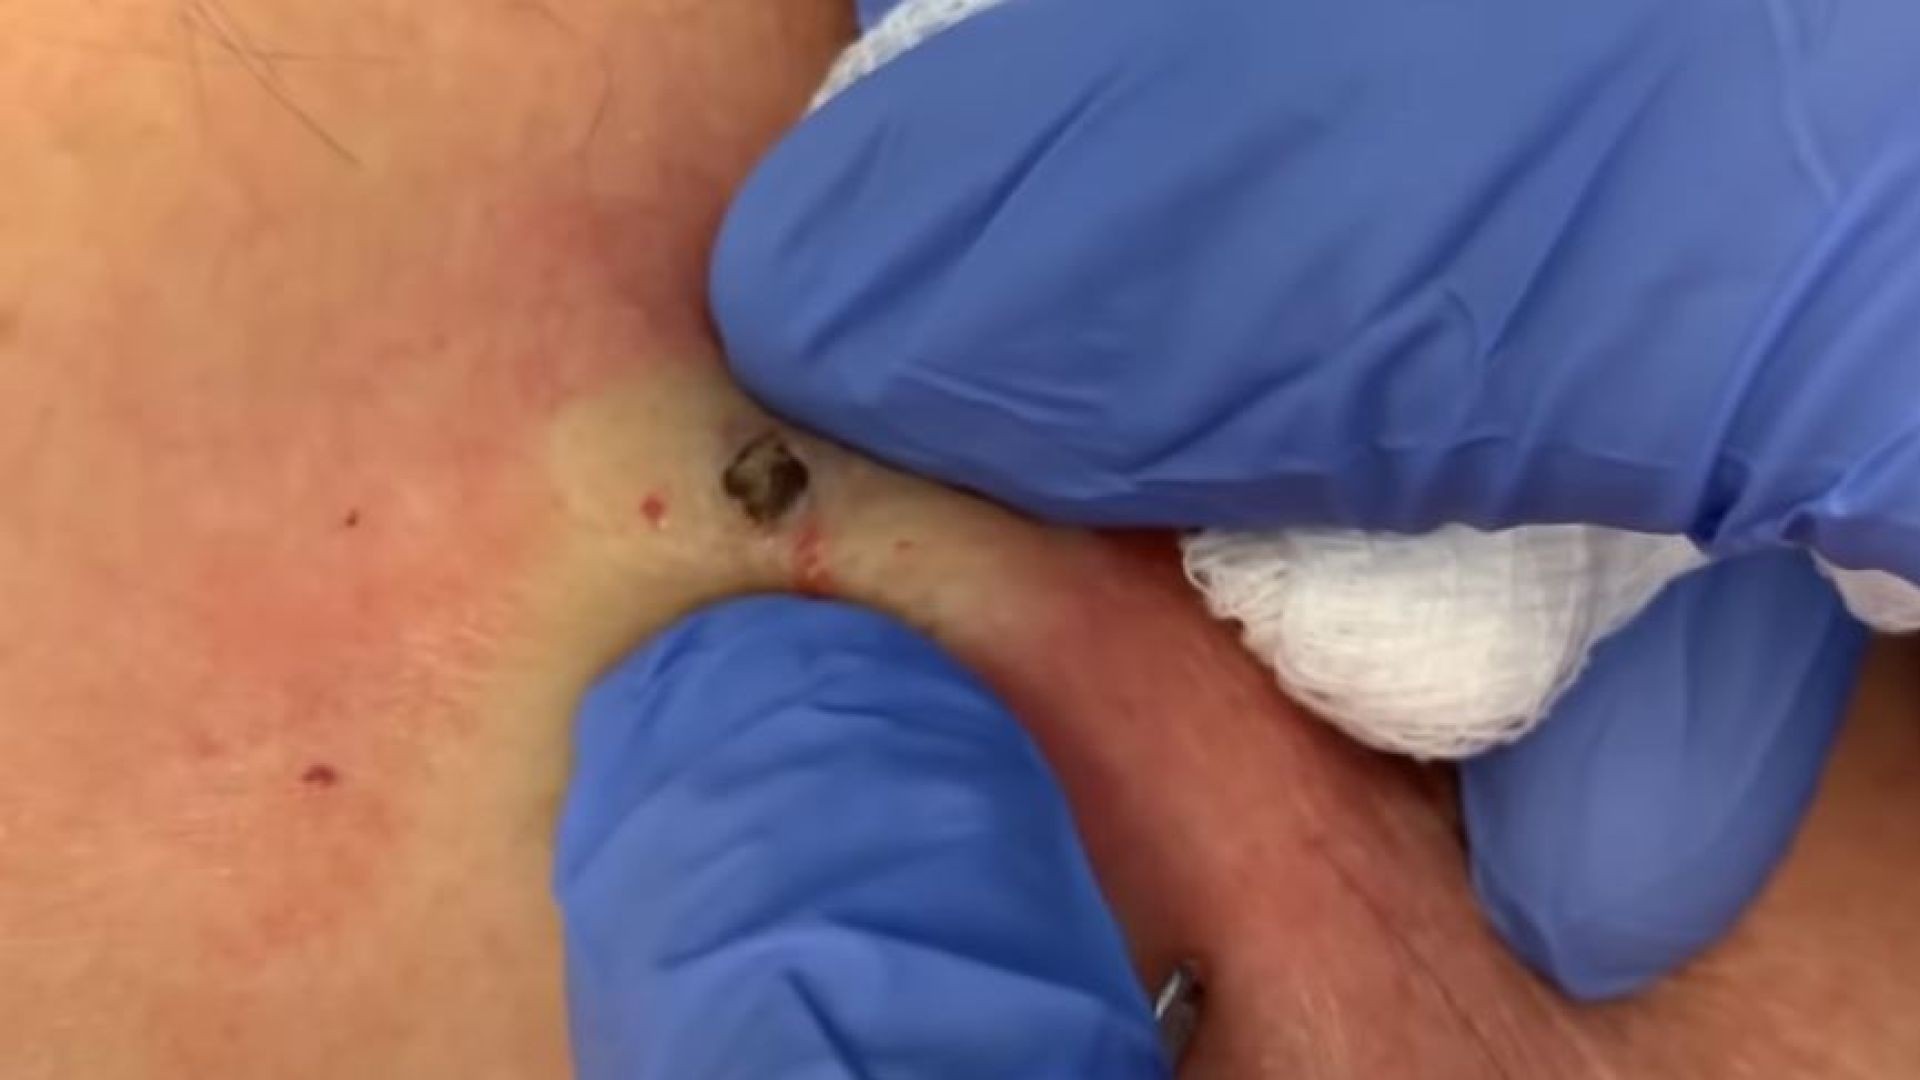 Blackhead (Jelly Bean) Extraction From Behind the Neck